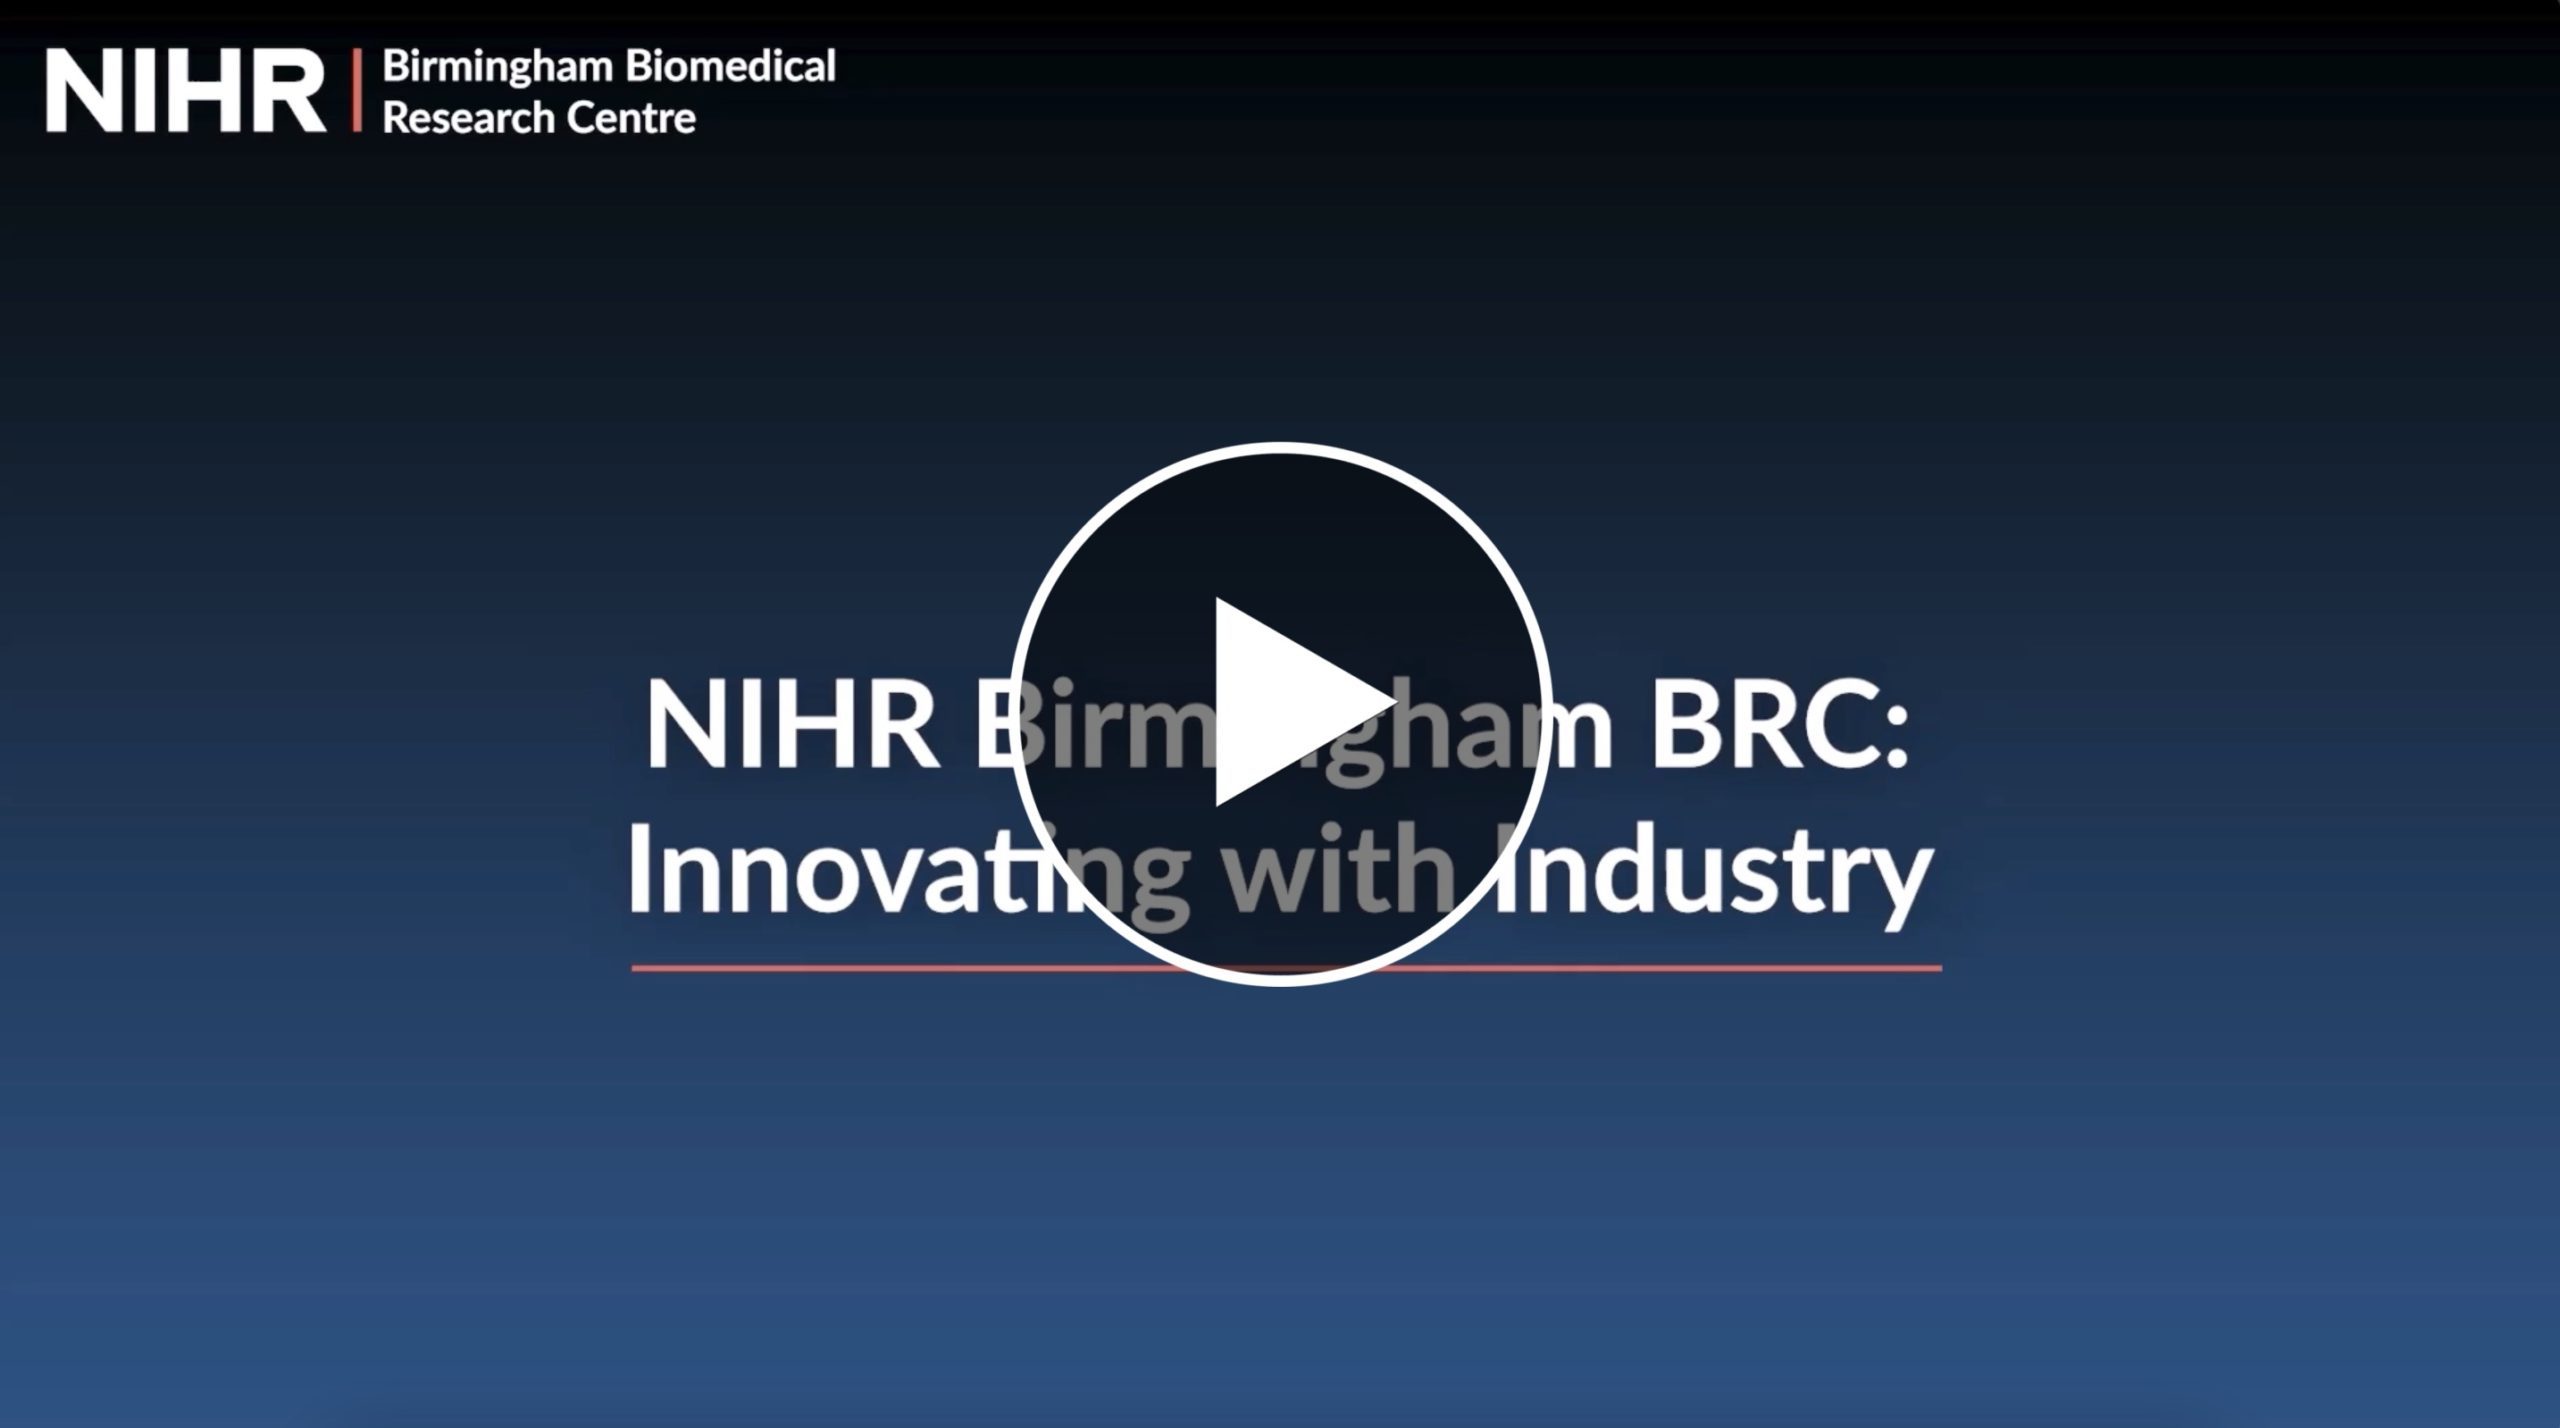 Still image from video titled 'NIHR Birmingham BRC: Innovating with industry'